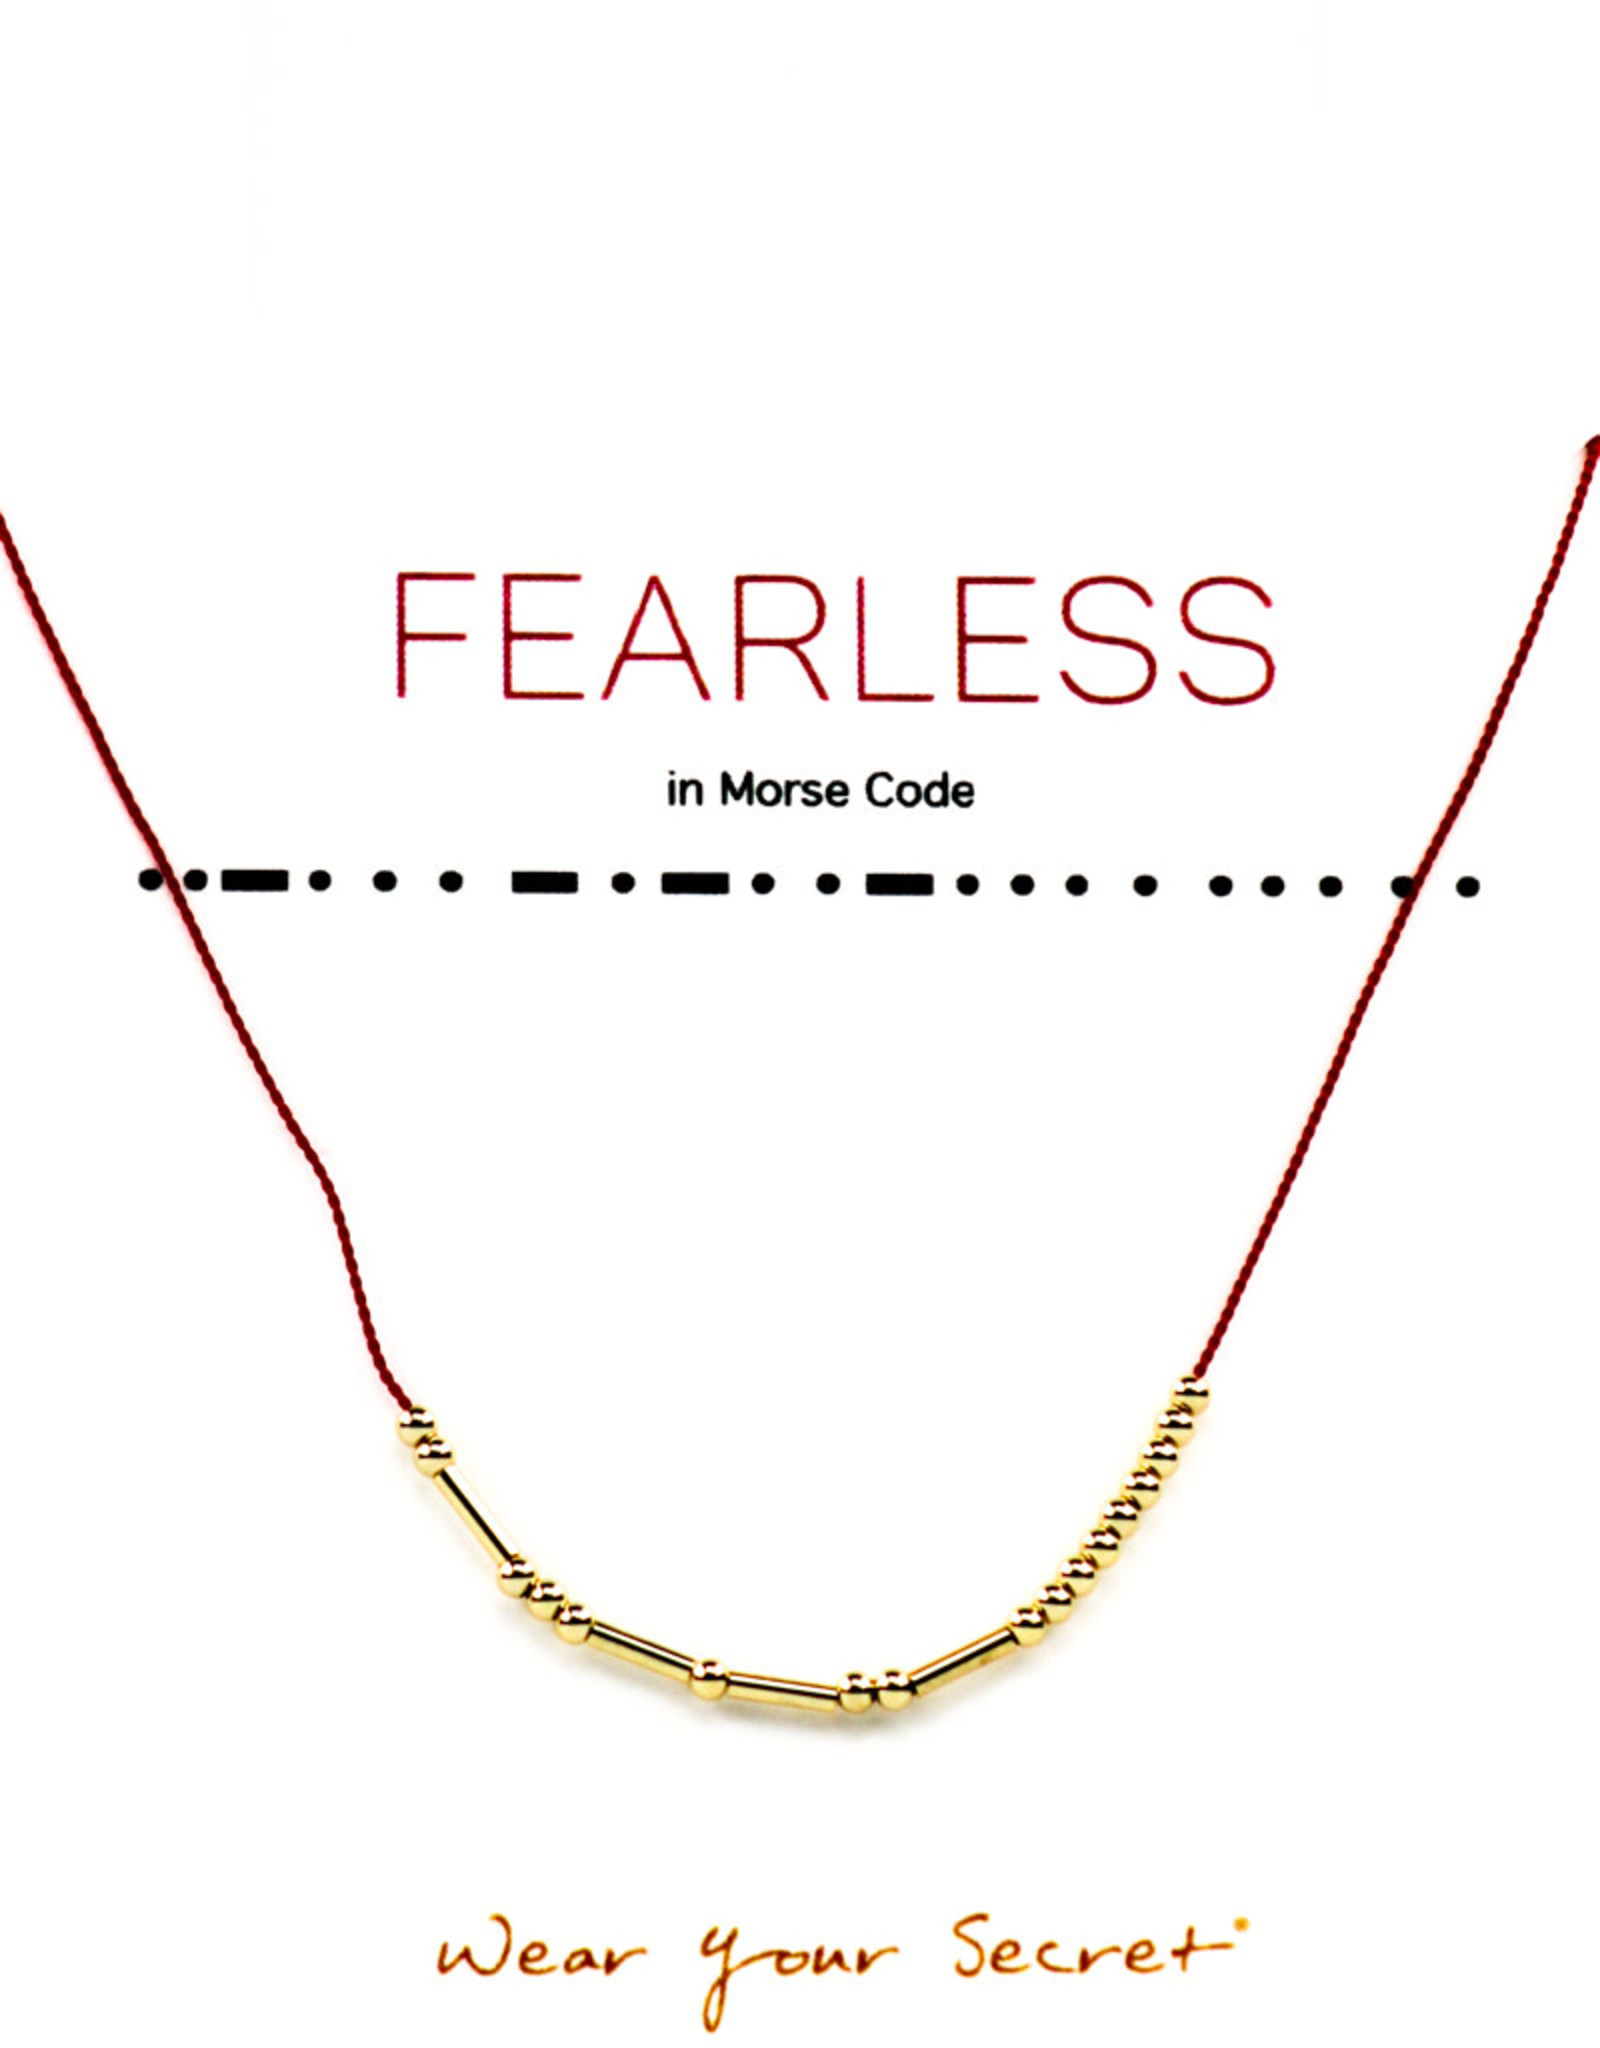 Little Be Design Morse Code "Fearless" necklace